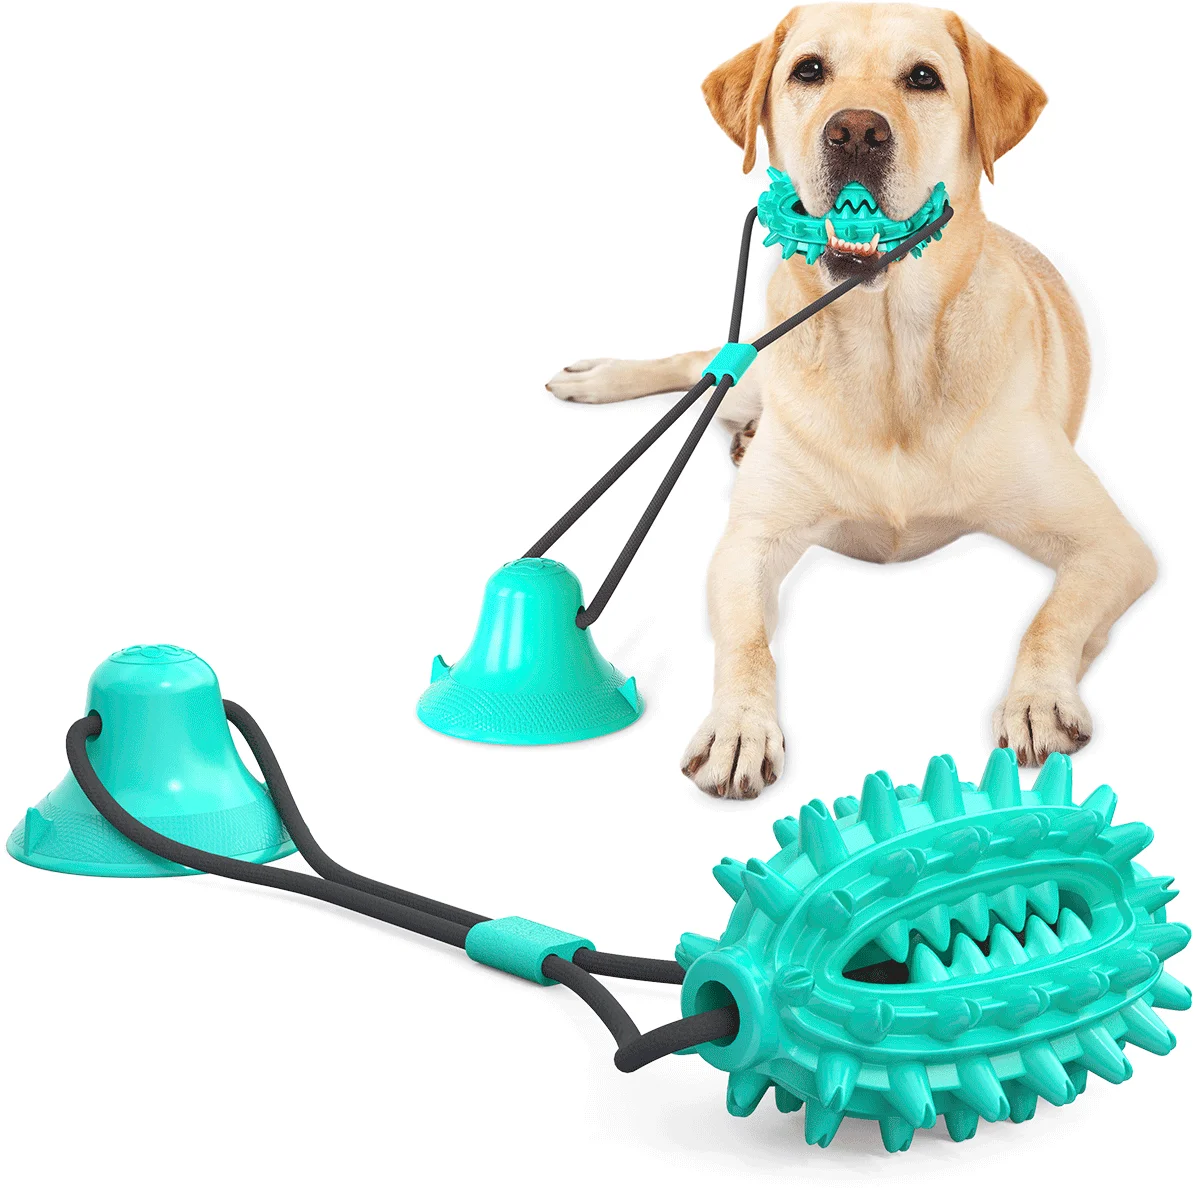 

Factory Wholesale Pet Molar Bite Toothbrush Toys Suction Cup Interactive Dog Tug Chew Toy, Picture shows